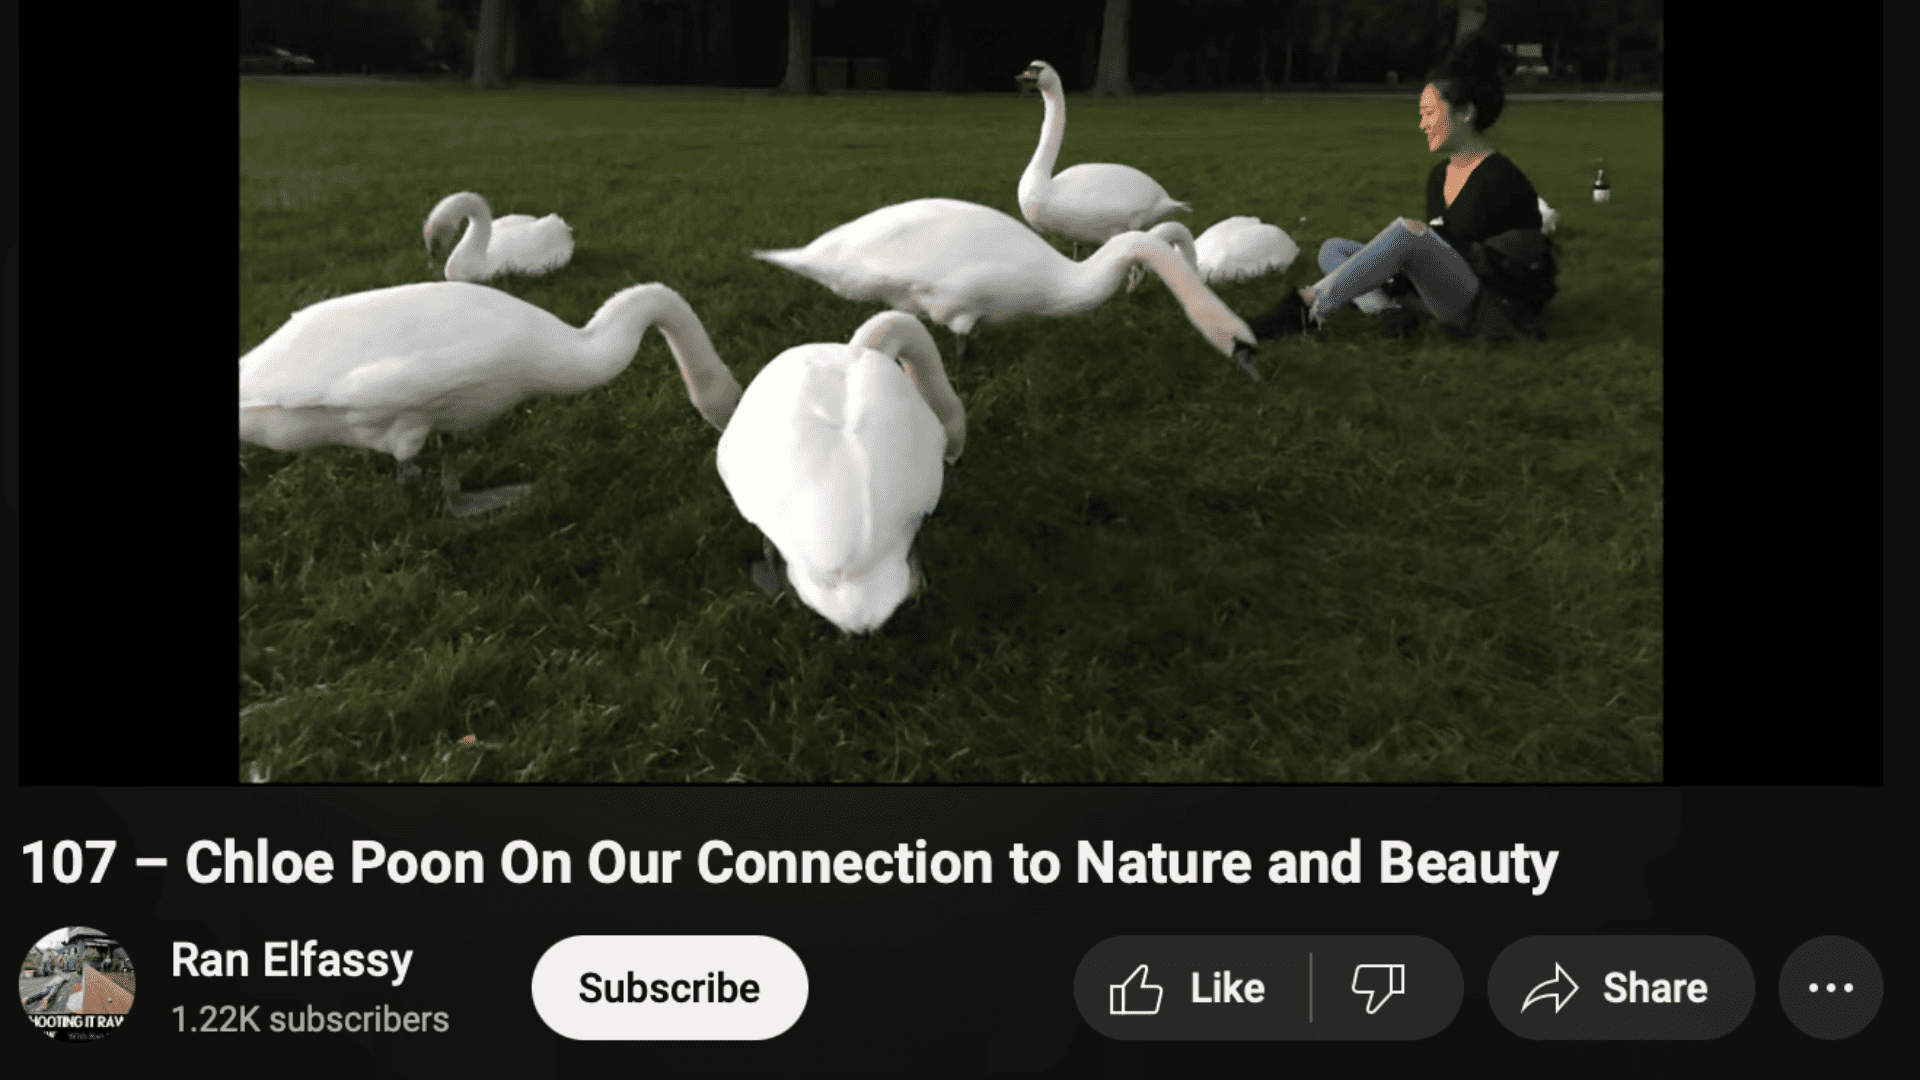 Chloe Poon On Our Connection to Nature and Beauty